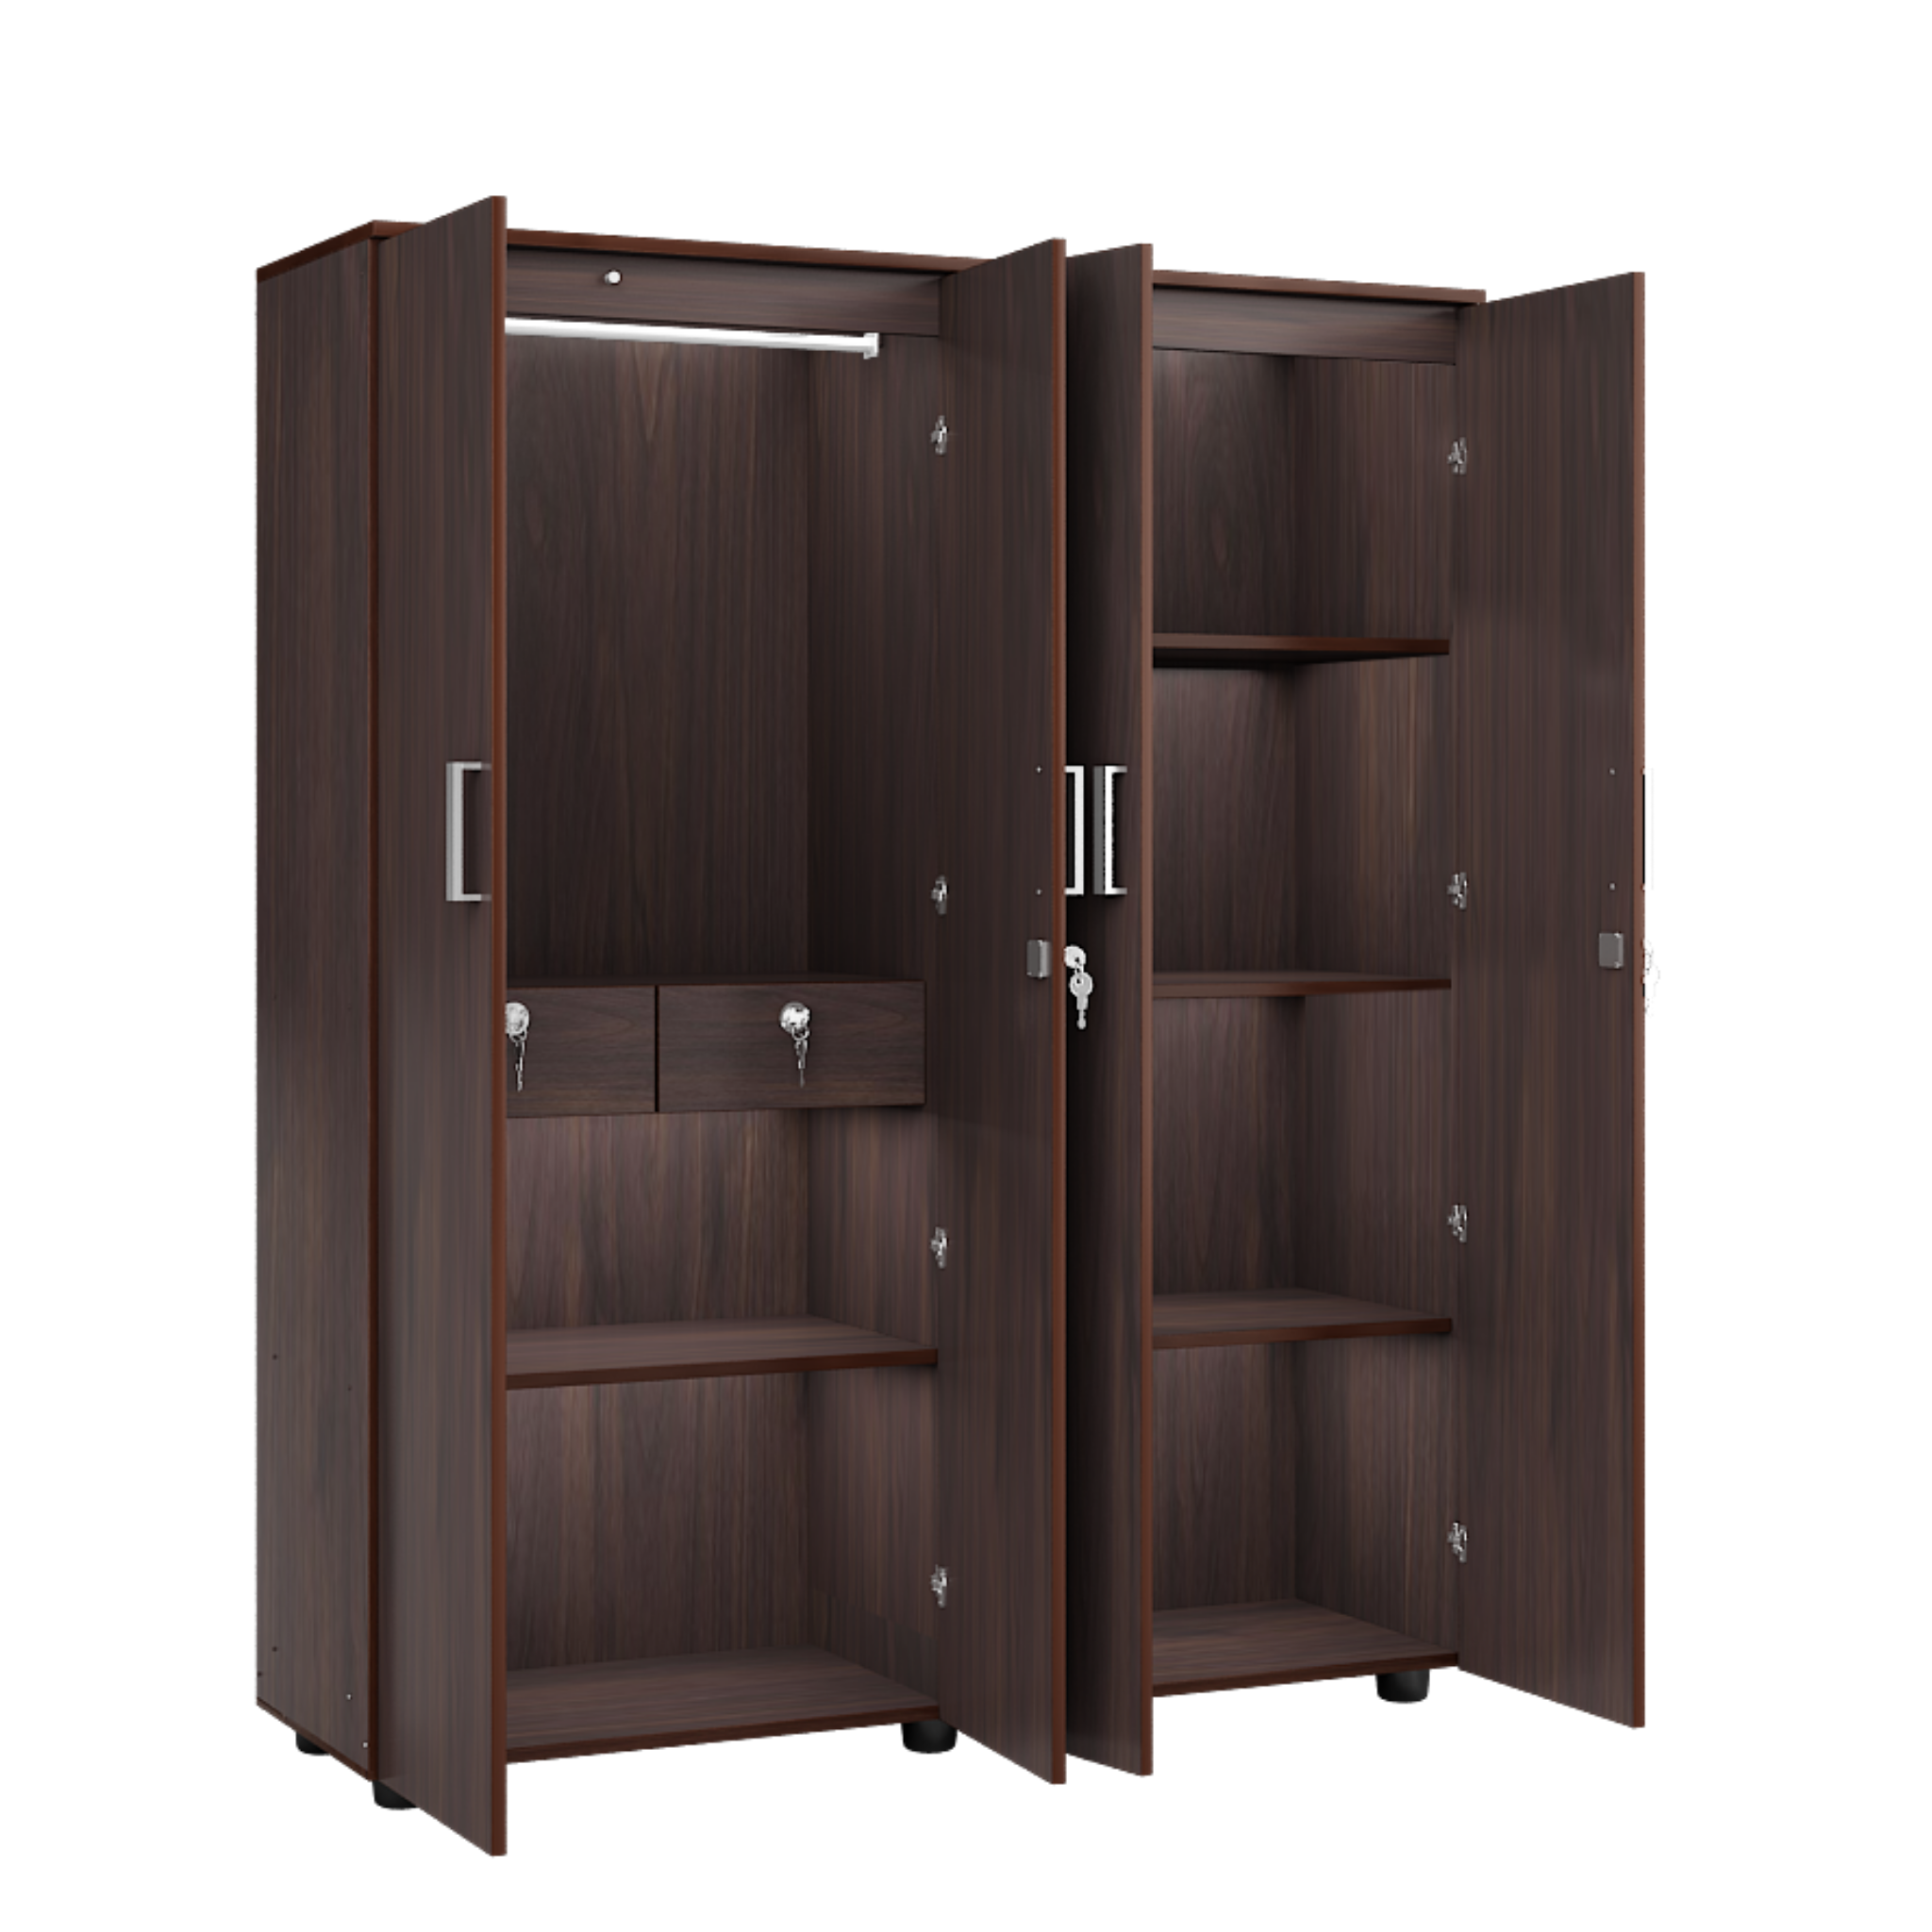 Super and Luxury Four Door Wardrobe with Dual Drawer